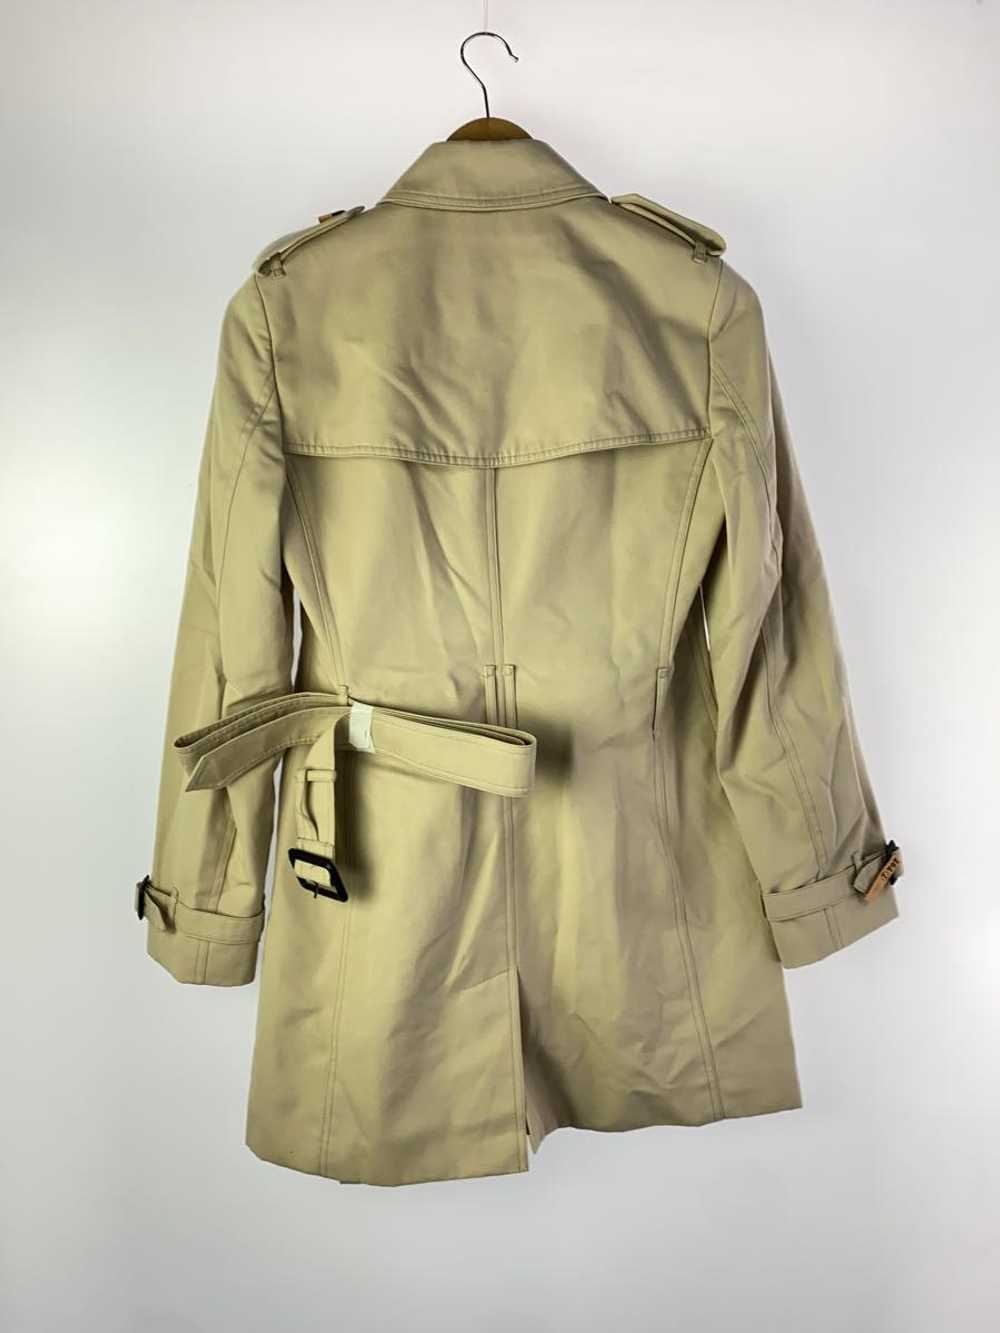 Burberry  London Short Trench Coat 36 Cotton  Wear - image 2